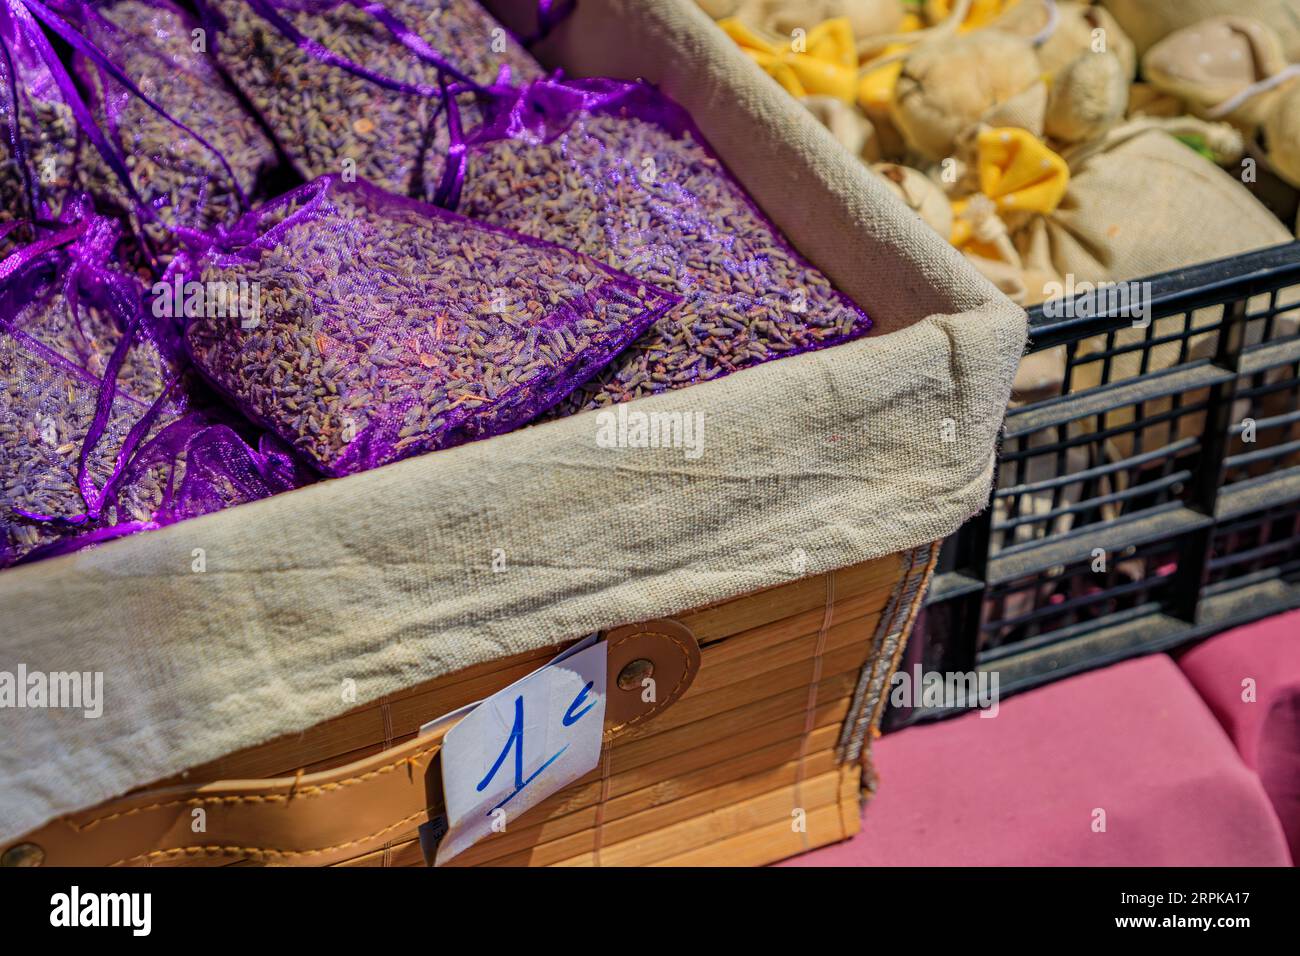 Colorful decorative sachets filled with lavender the Cours Saleya, famous market in the Old Town Vieille Ville, Nice, French Riviera, South of France Stock Photo